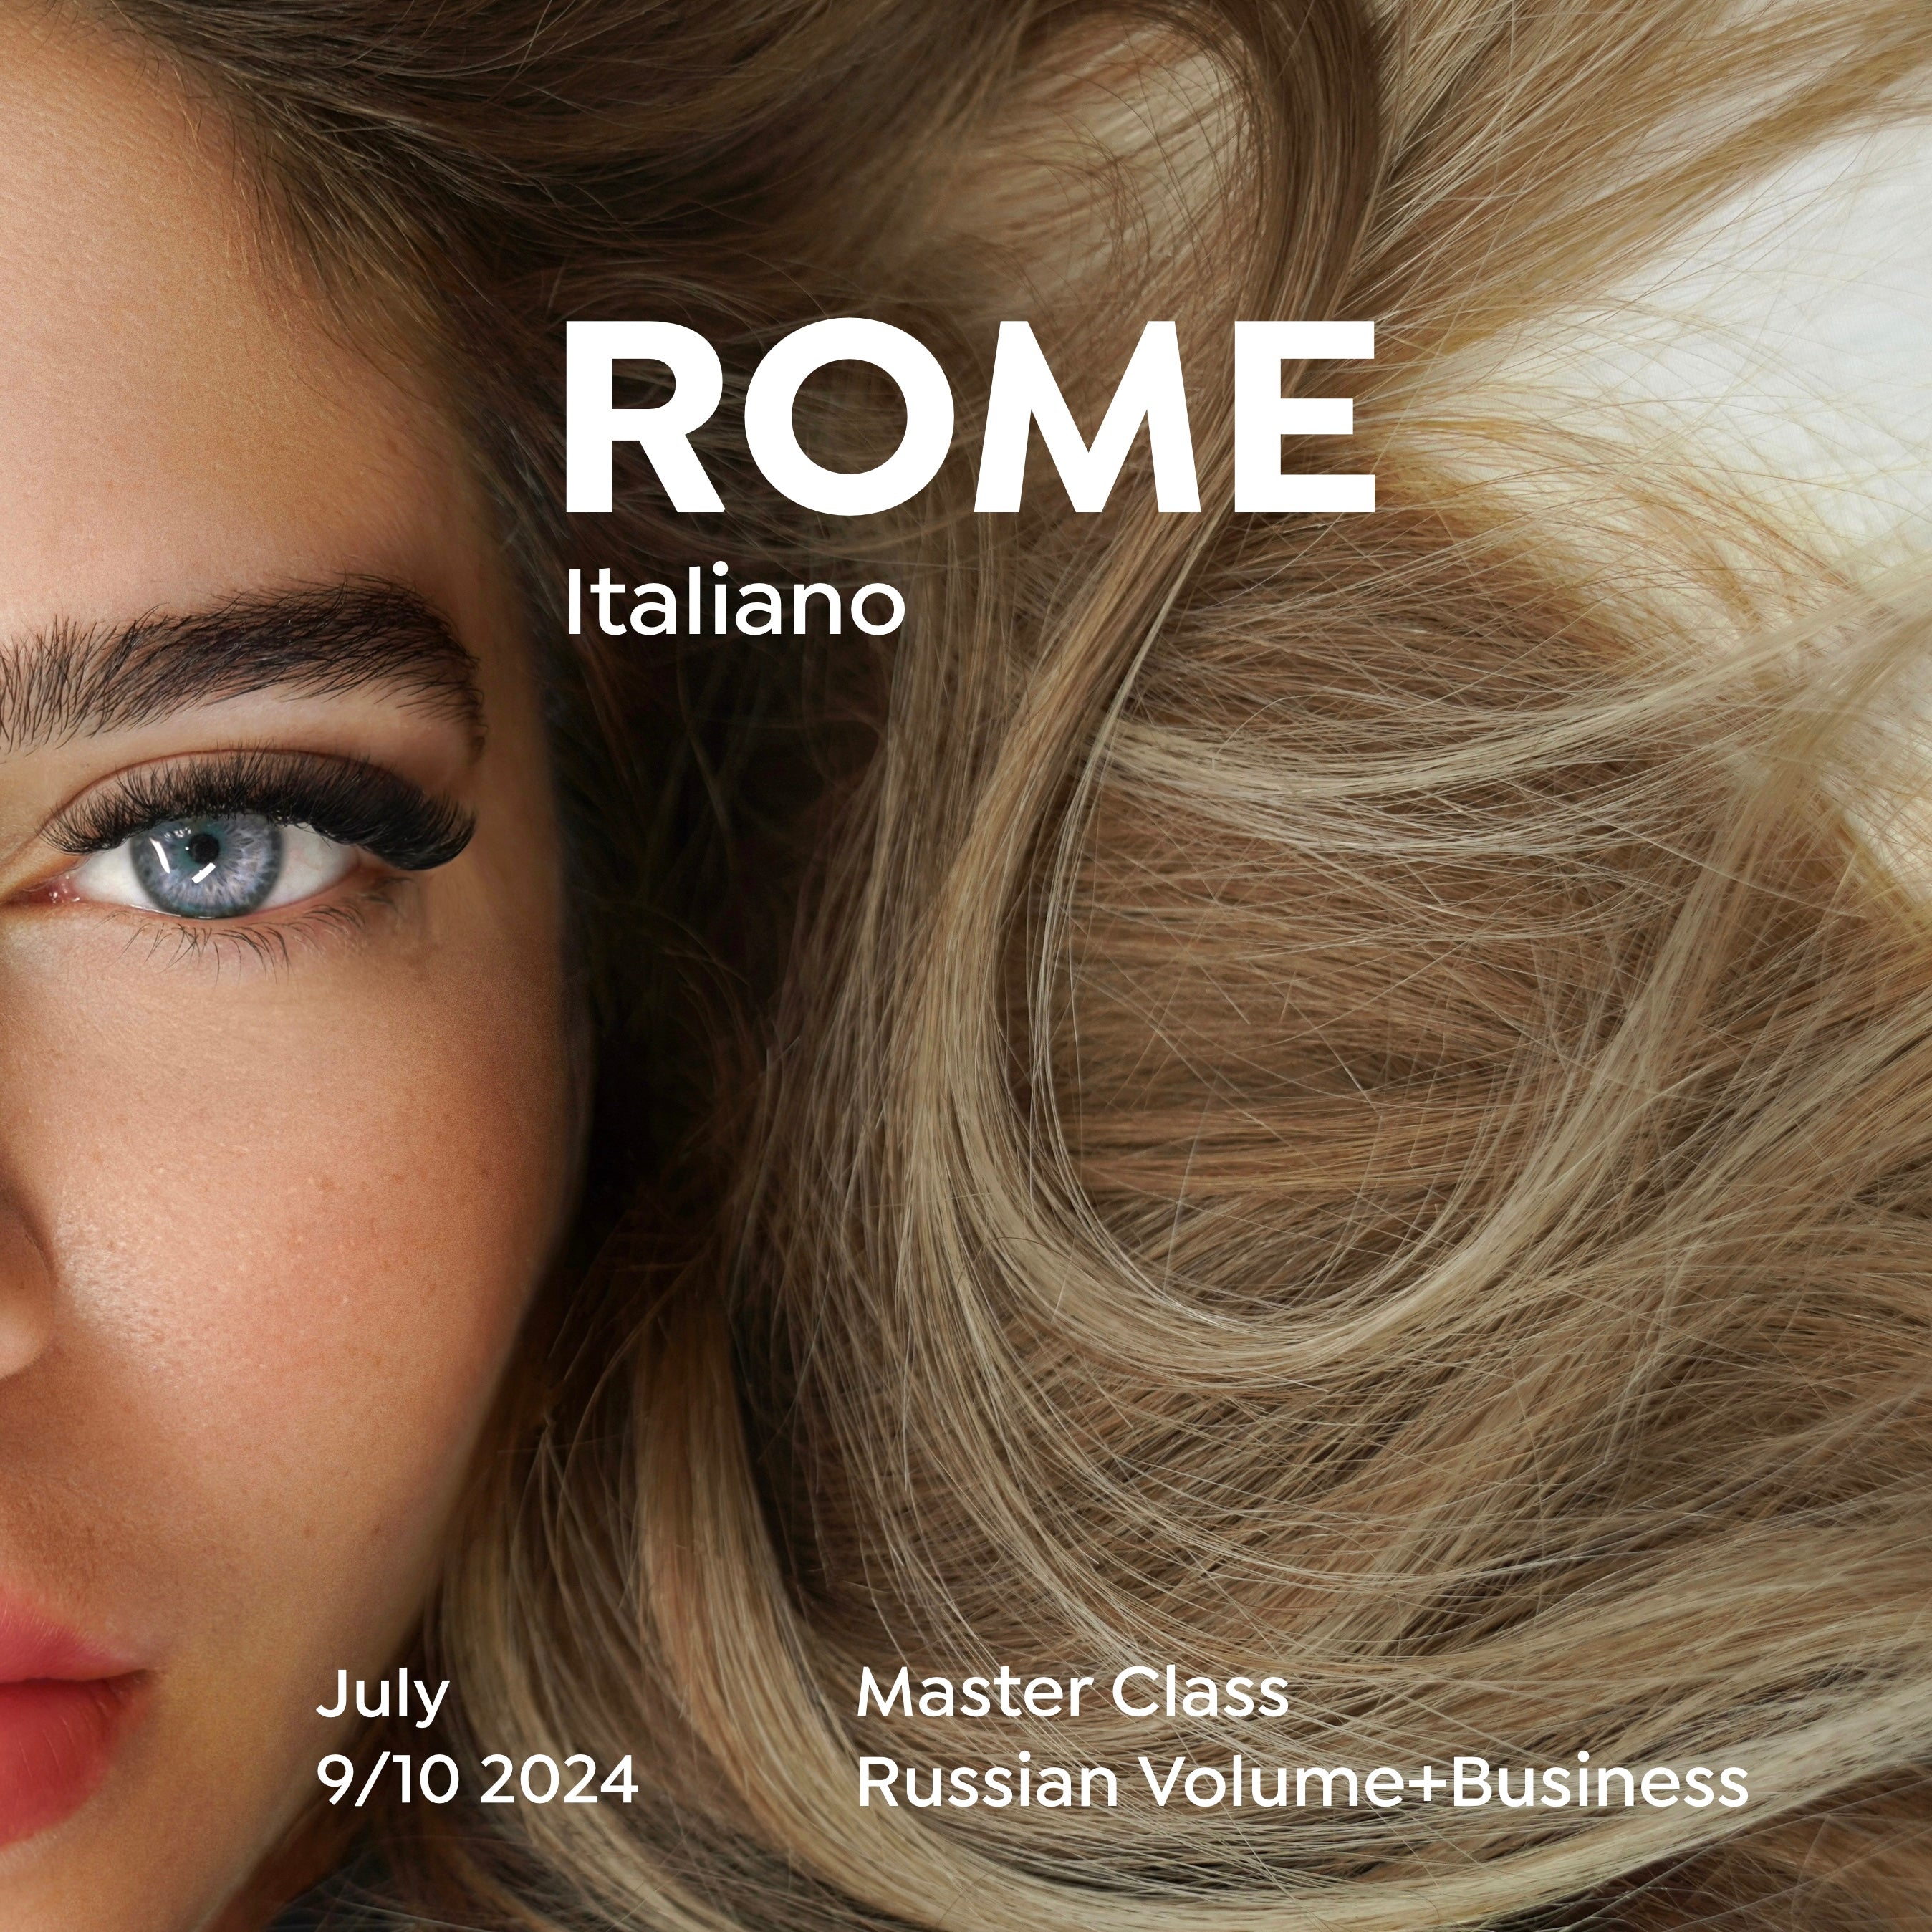 Volume Master Class Rome, Italy July 9th-10th, 2024